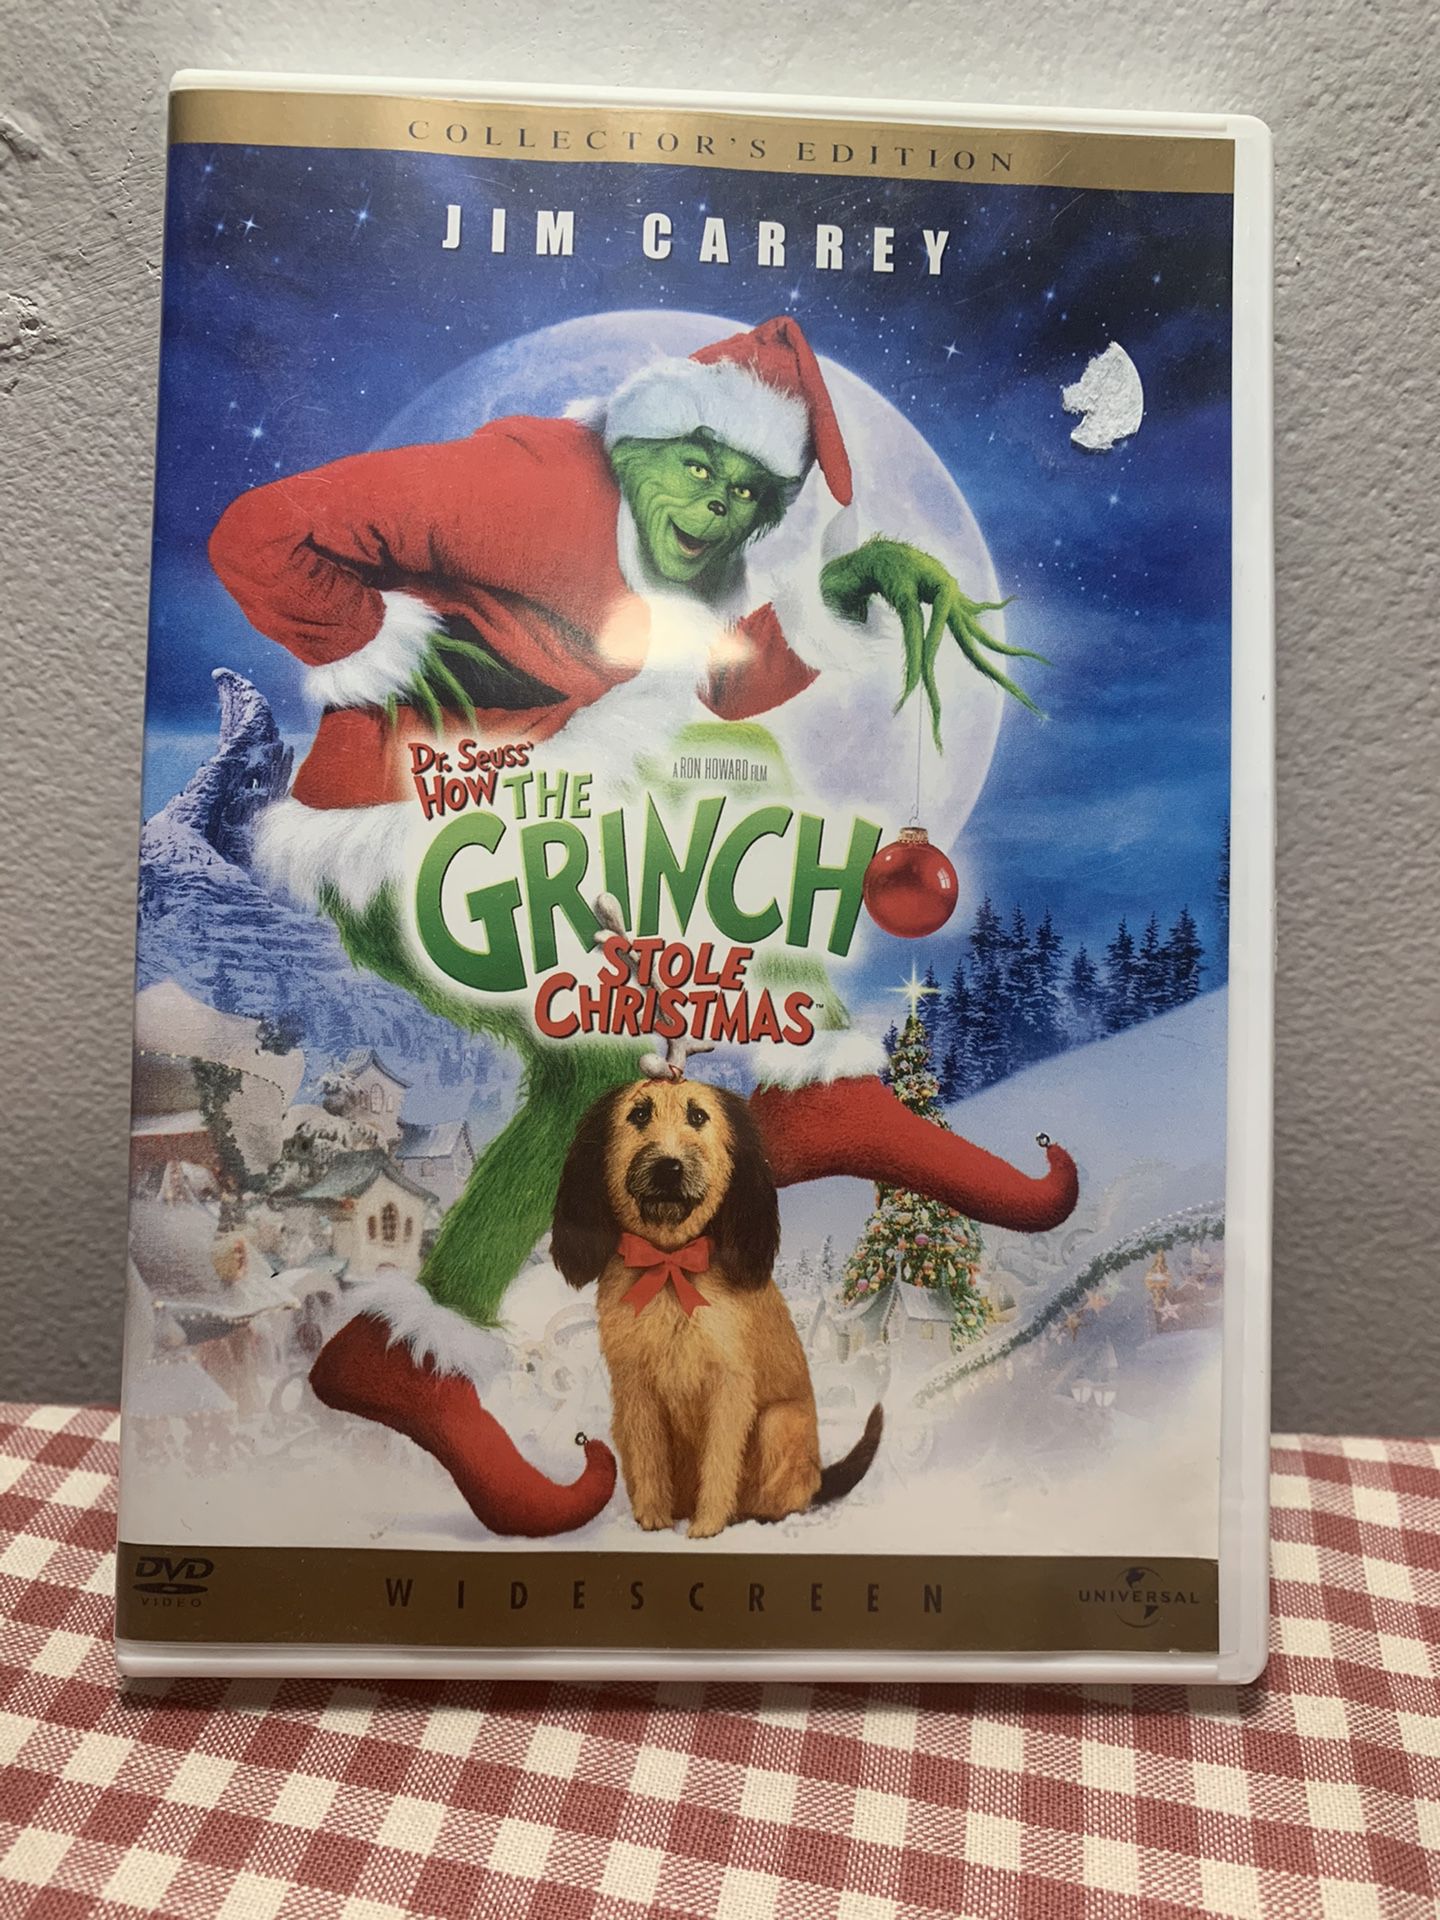 The Grinch who Stole Christmas Collectors Edition Dvd